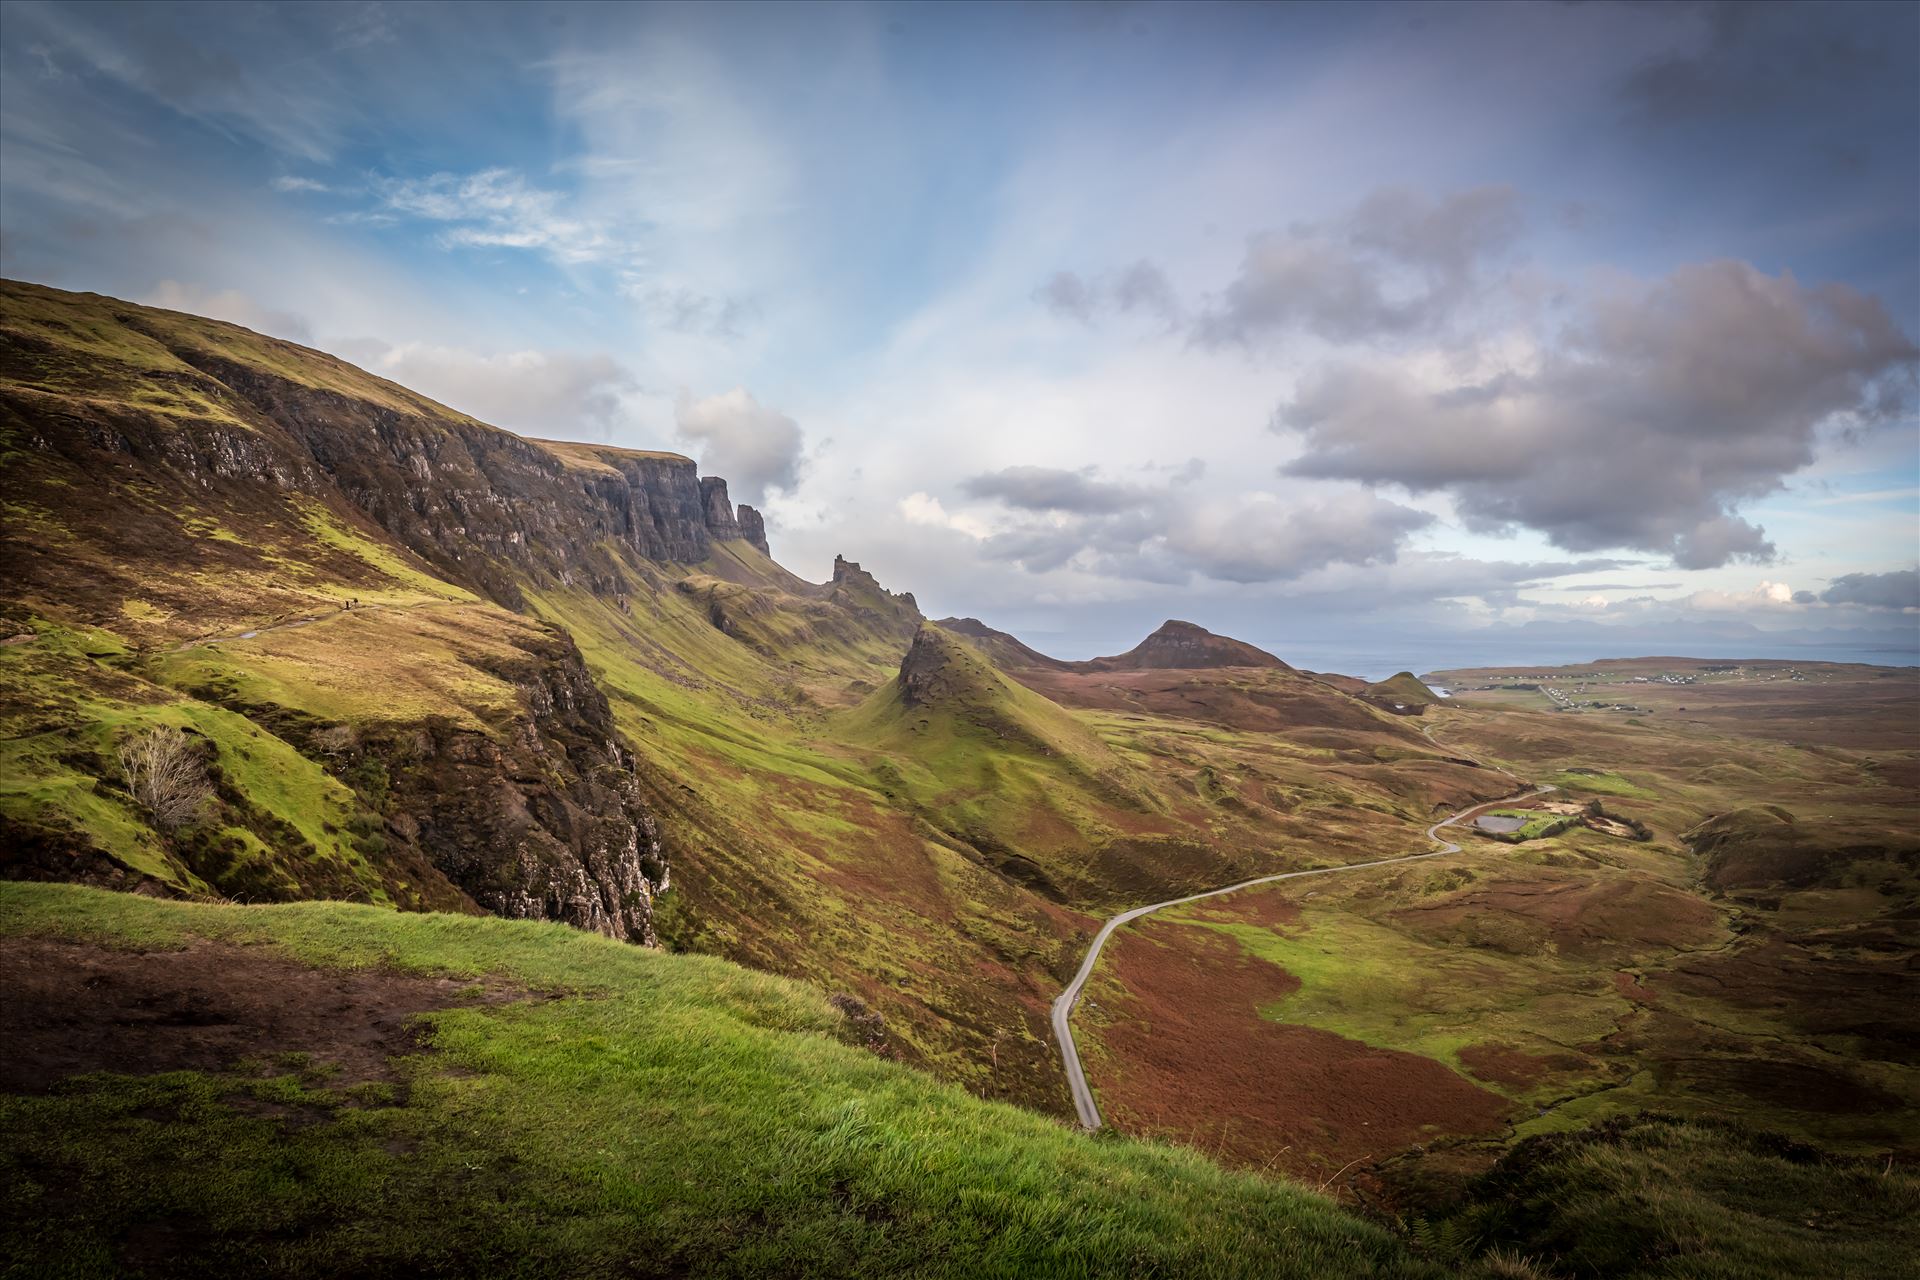 The Quiraing (3) - The Quiraing is a landslip on the northernmost summit of the Trotternish on the Isle of Skye. The whole of the Trotternish Ridge escarpment was formed by a great series of landslips, the Quiraing is the only part of the slip still moving. by philreay